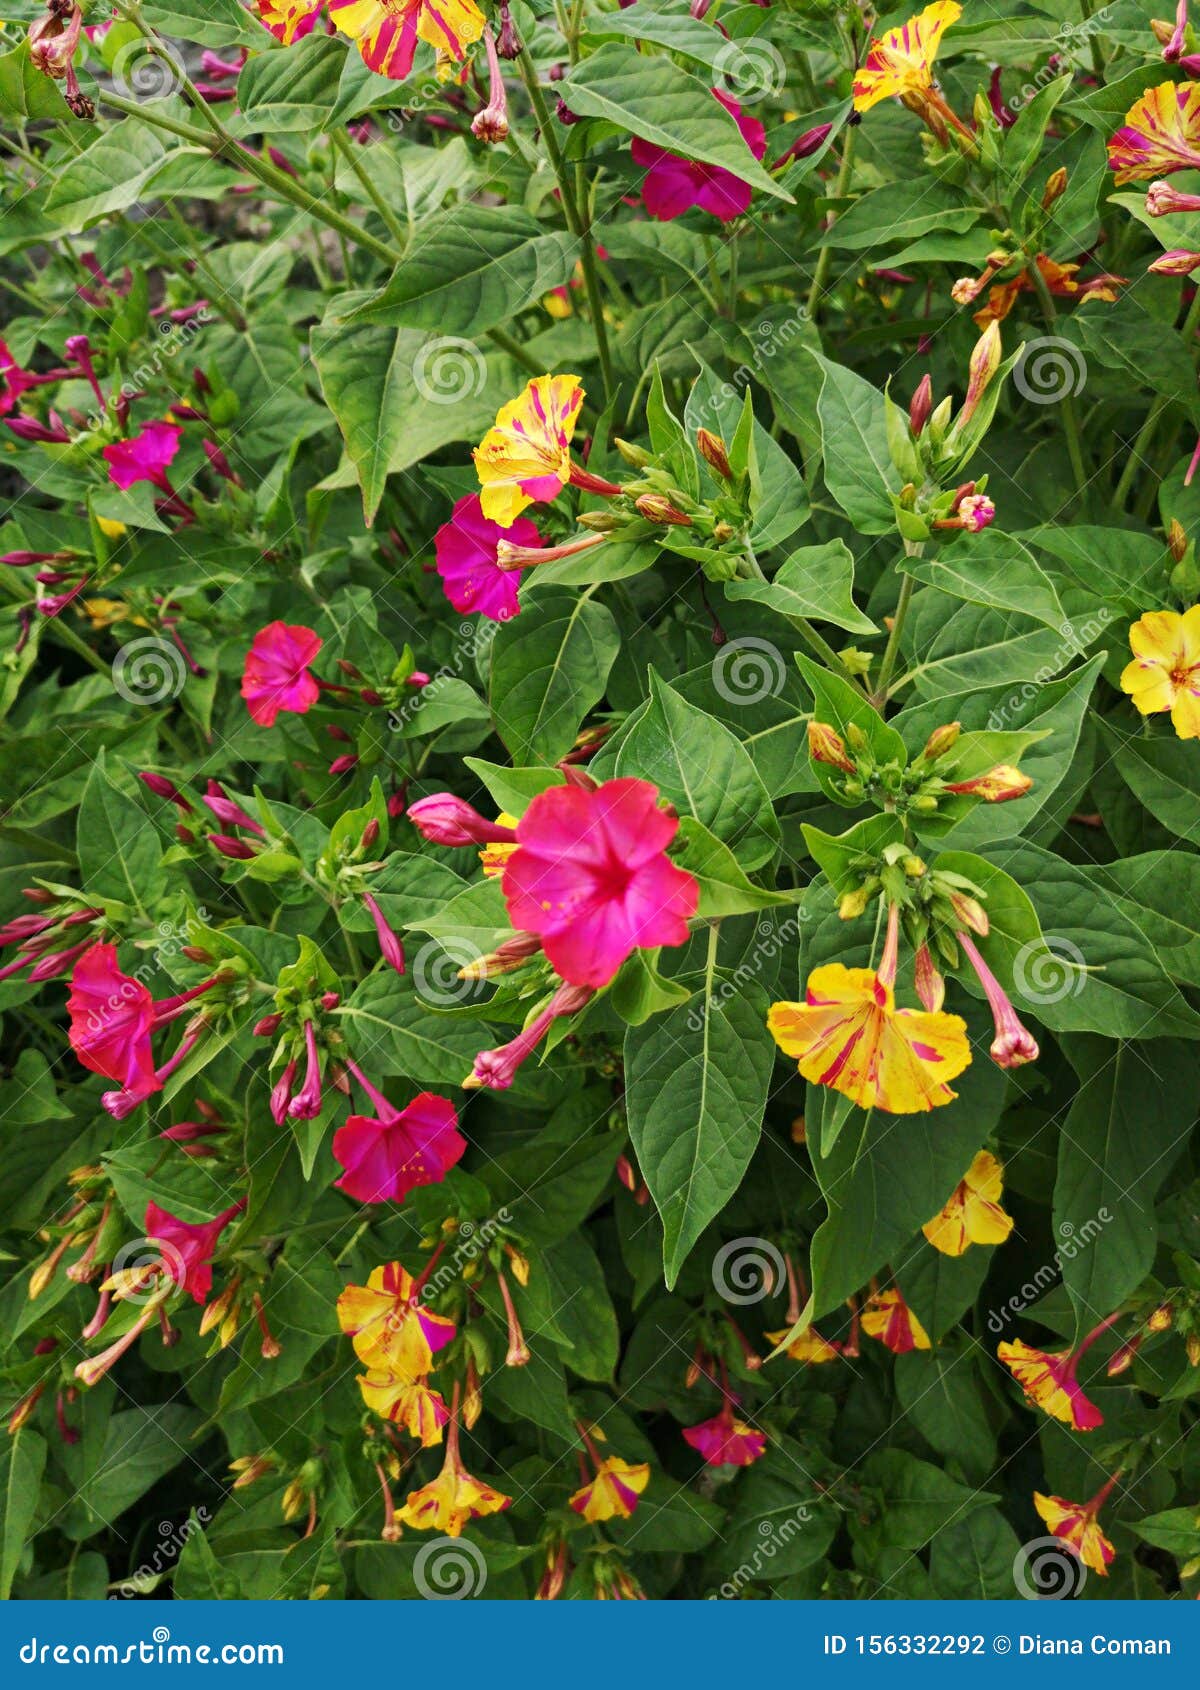 Pink and Golden Mirabilis Flowers in the Garden Stock Photo - Image of ...